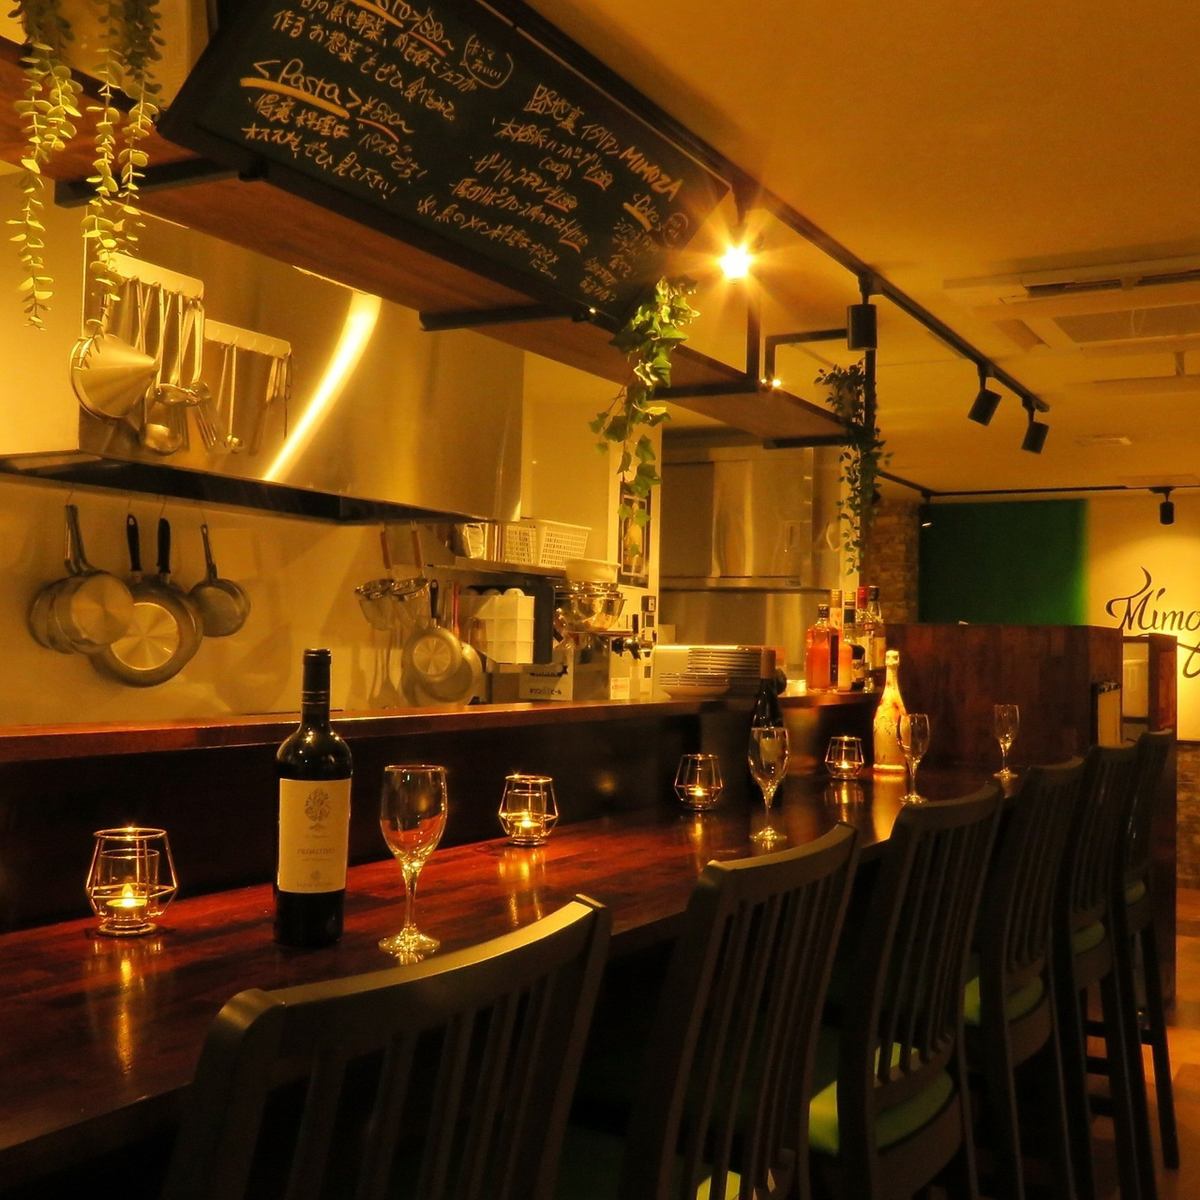 The calm atmosphere is recommended for dates ♪ Wine is also available!